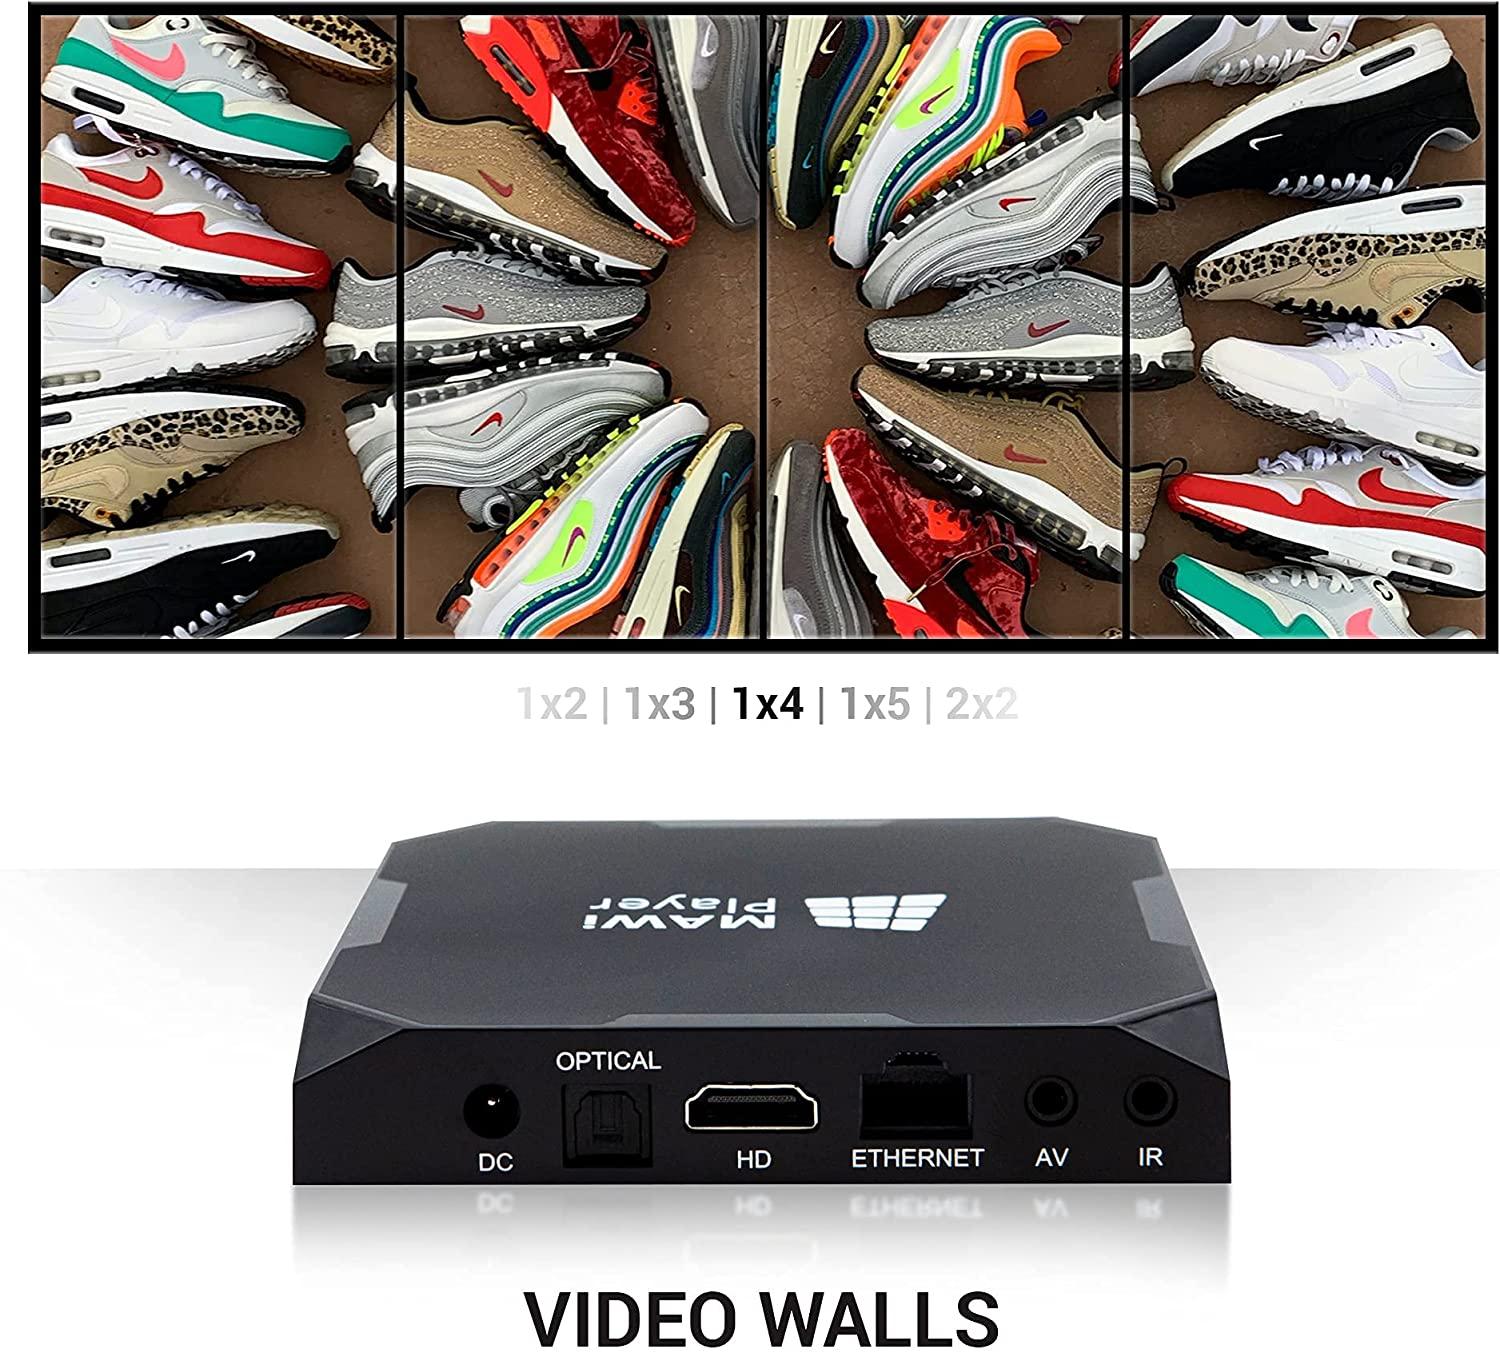 A video wall needs a digital signage player. Source: ubuy